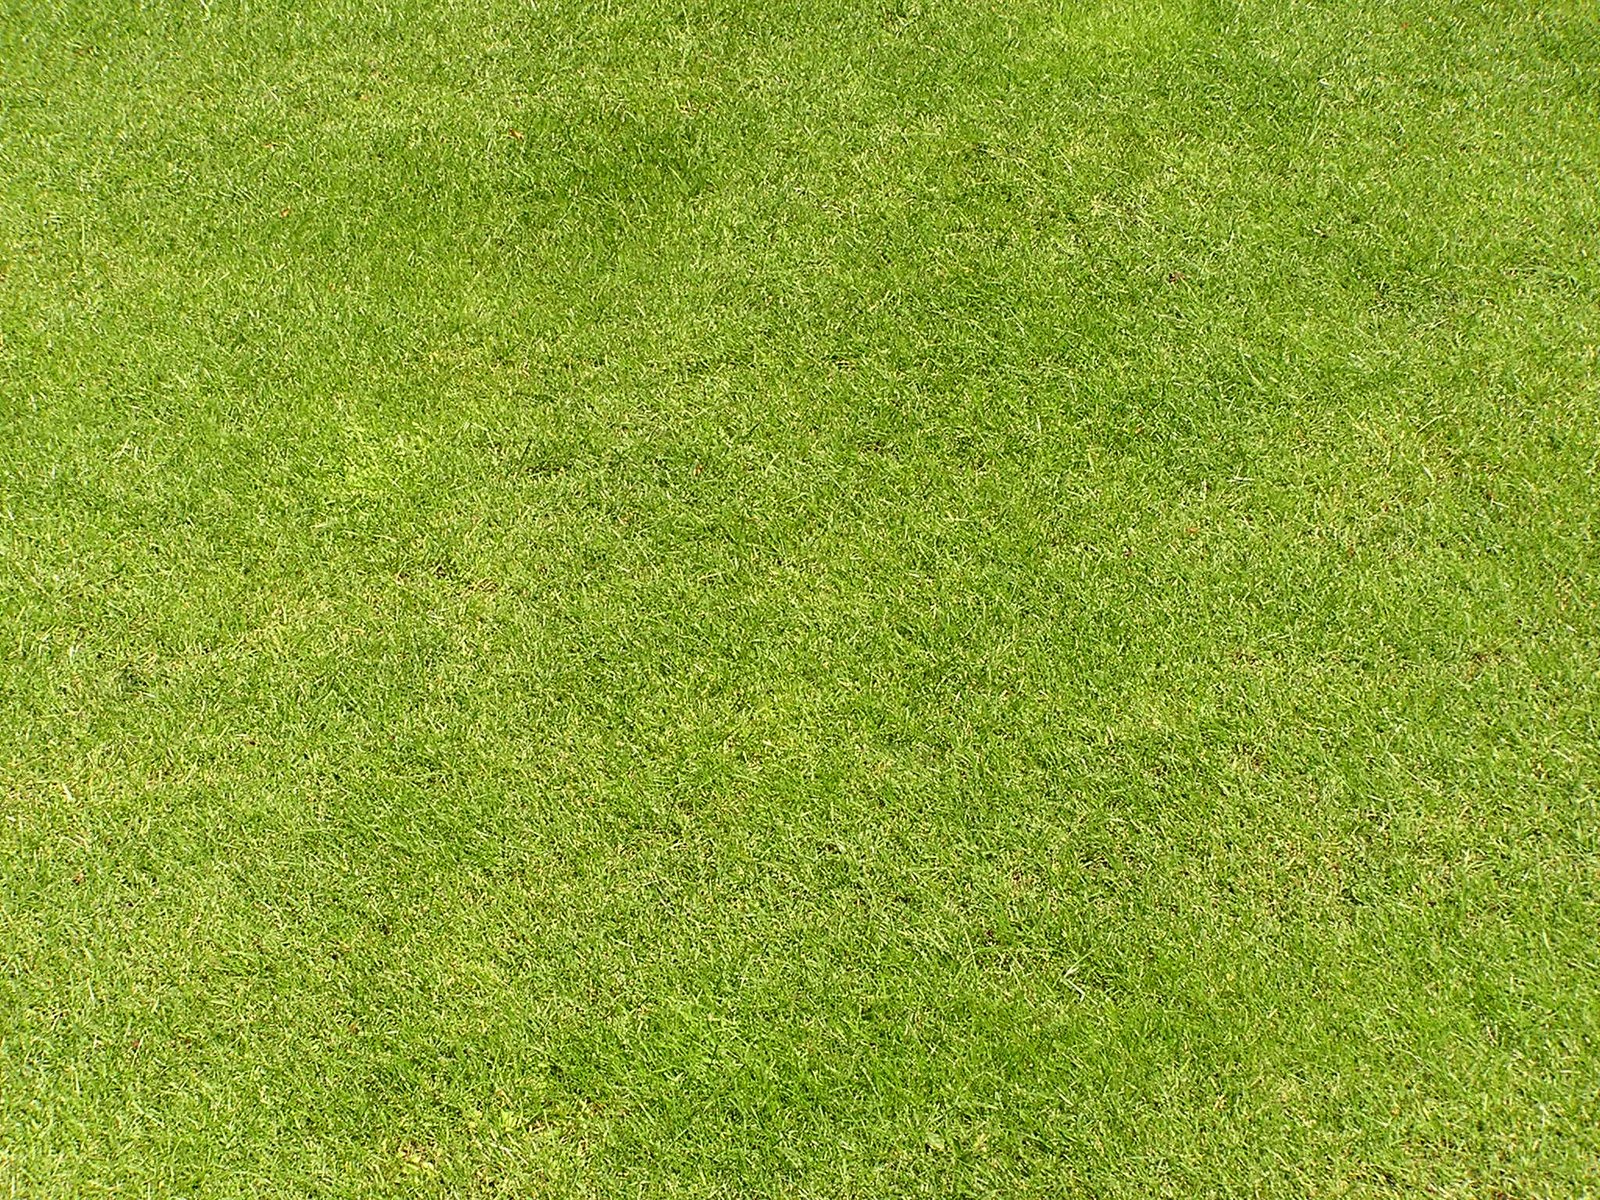 Grass texture Free Photo Download